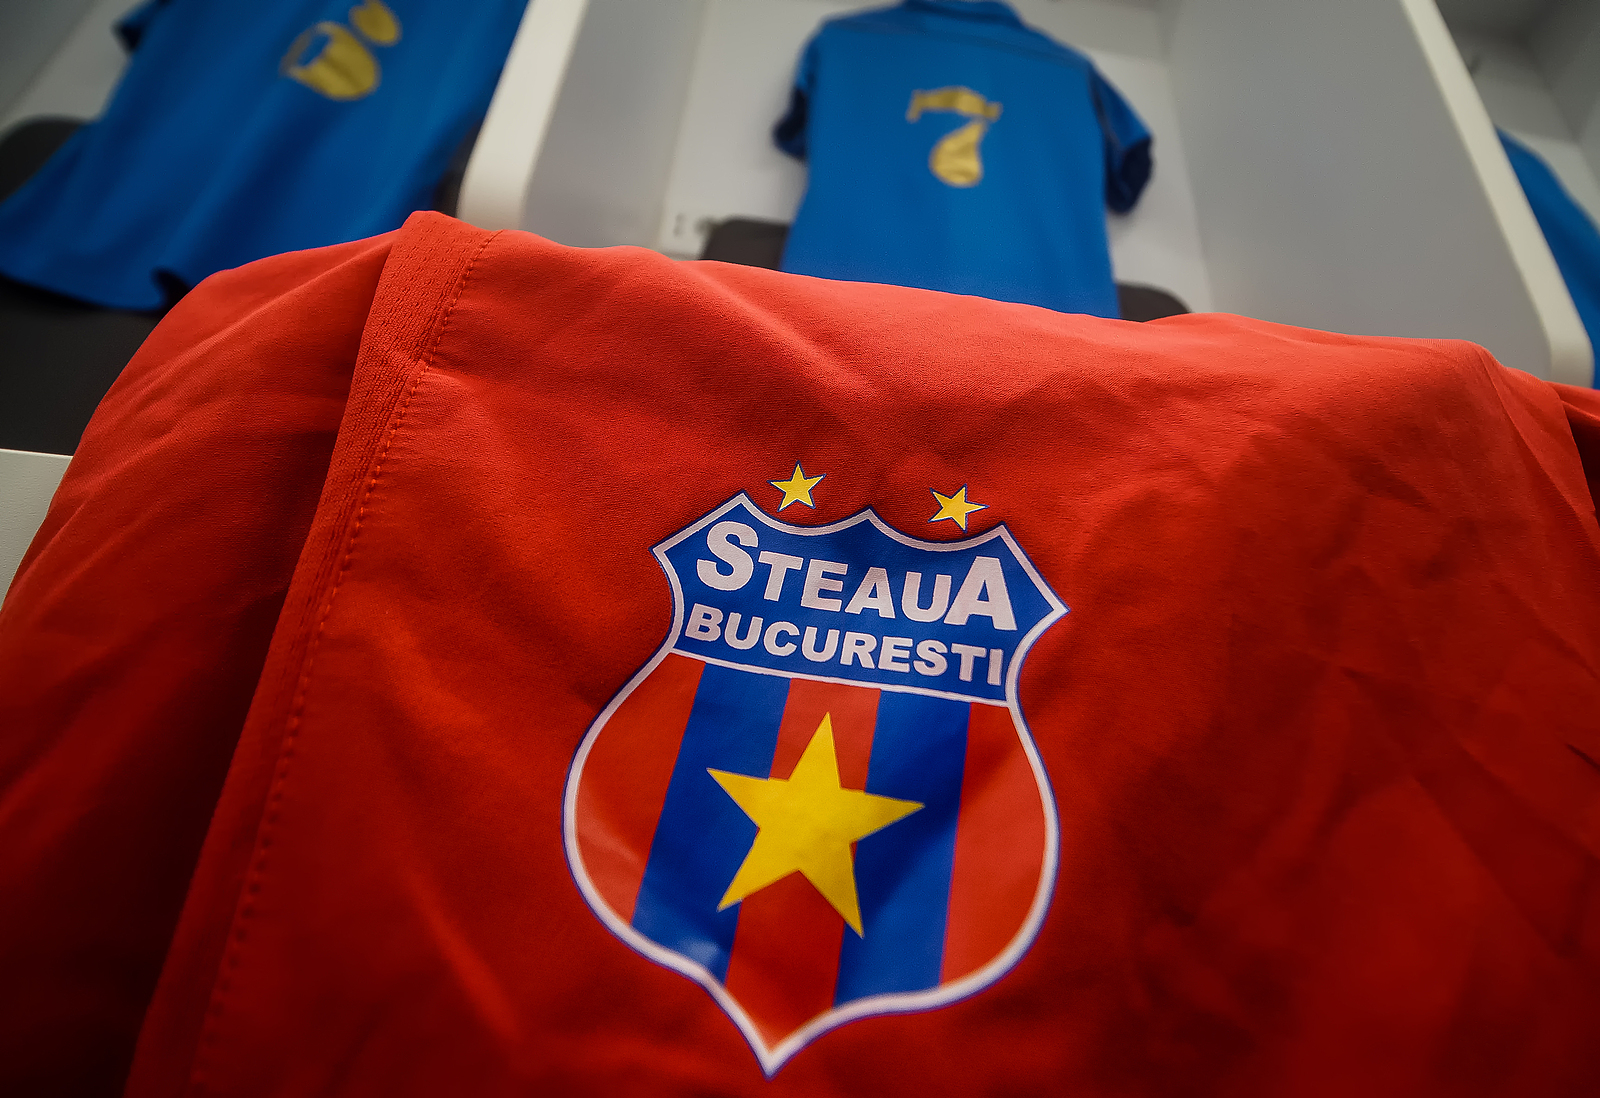 Steaua Bucharest to FC FCSB - The History Behind the Name Change -  Futbolgrad